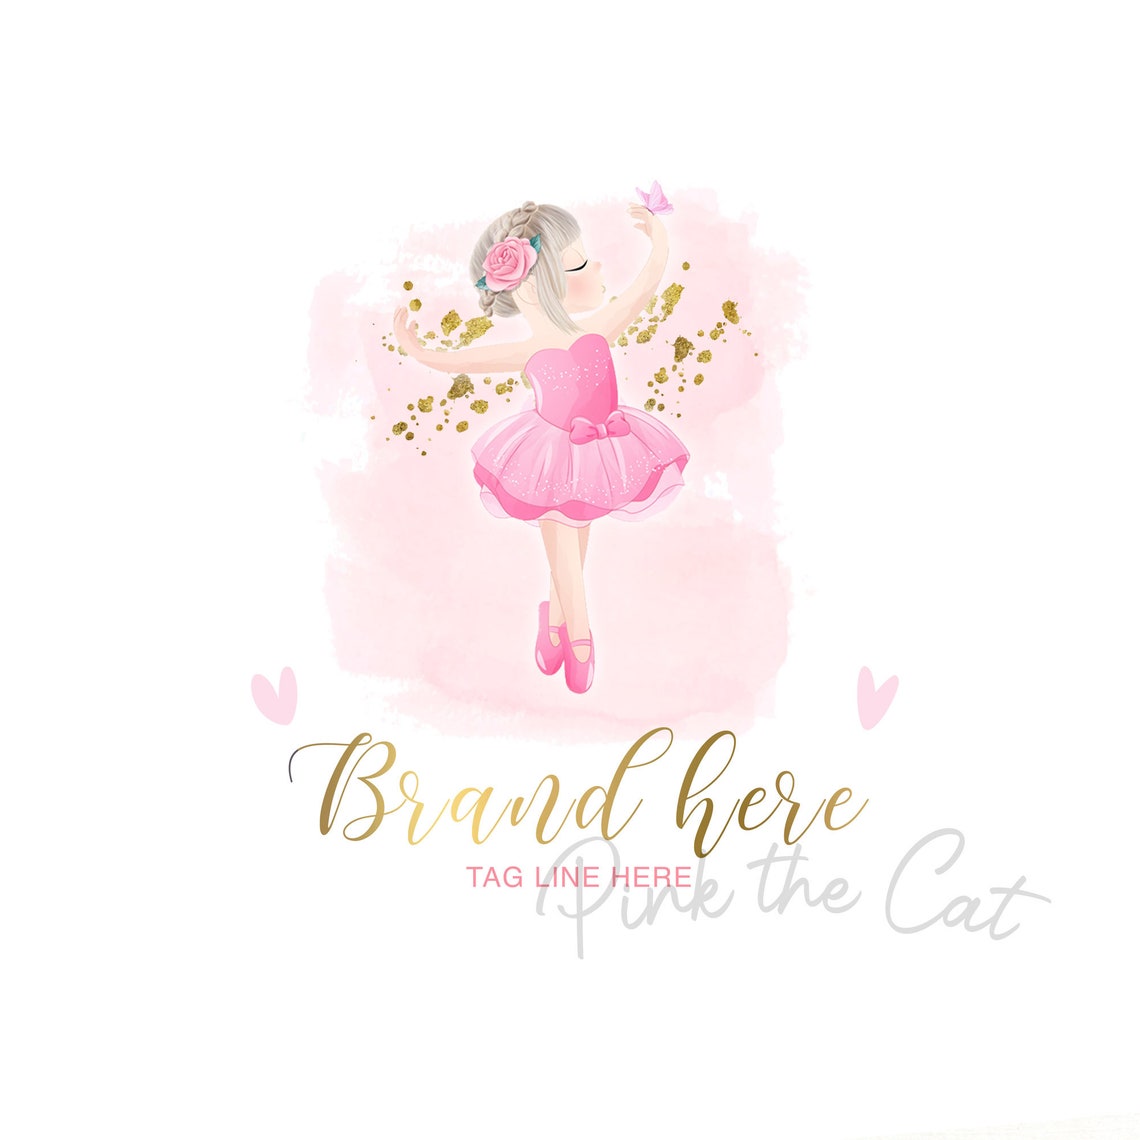 Ballerina Logo Png for Your Etsy Shop or Any Website or | Etsy